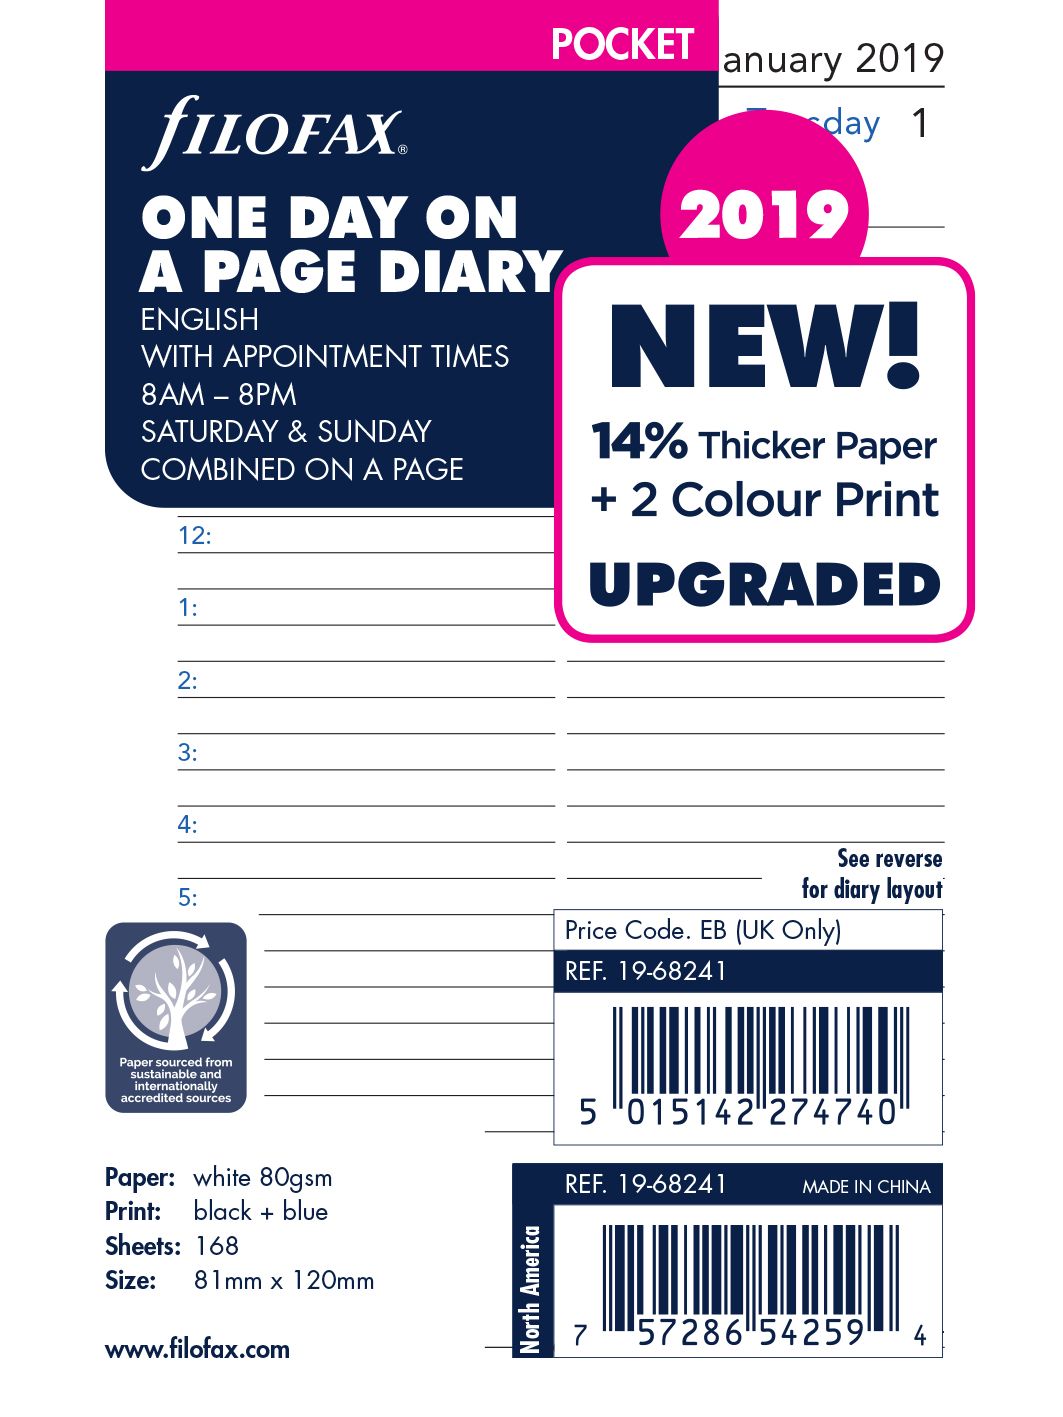 Filofax Pocket One Day Per Page 2019 Diary With Appointment Times